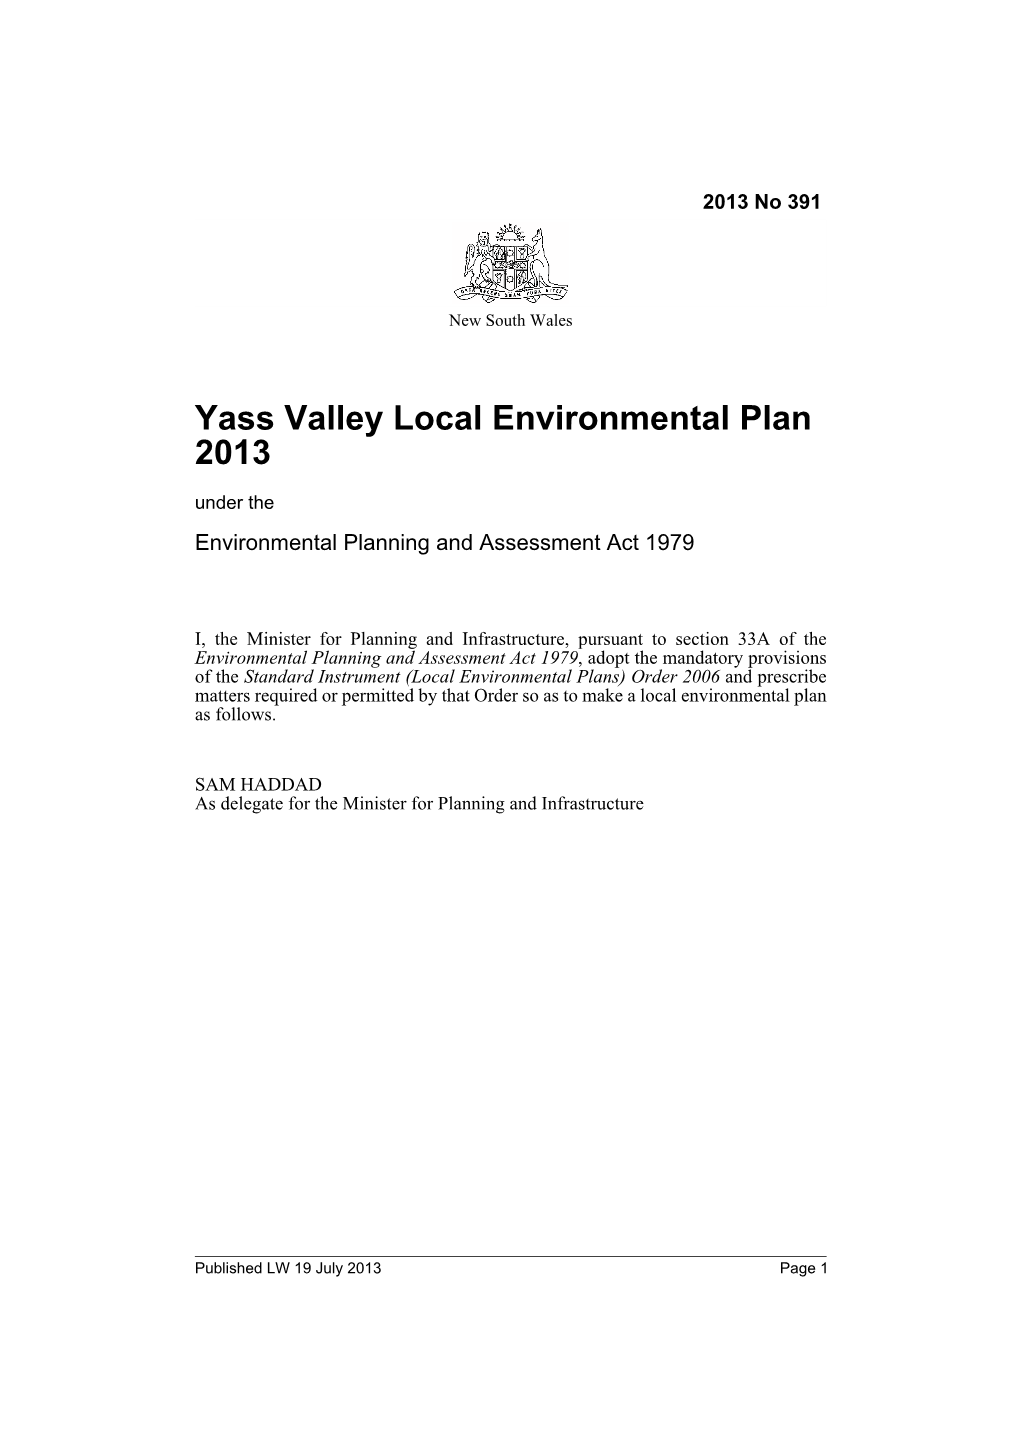 Yass Valley Local Environmental Plan 2013 Under the Environmental Planning and Assessment Act 1979